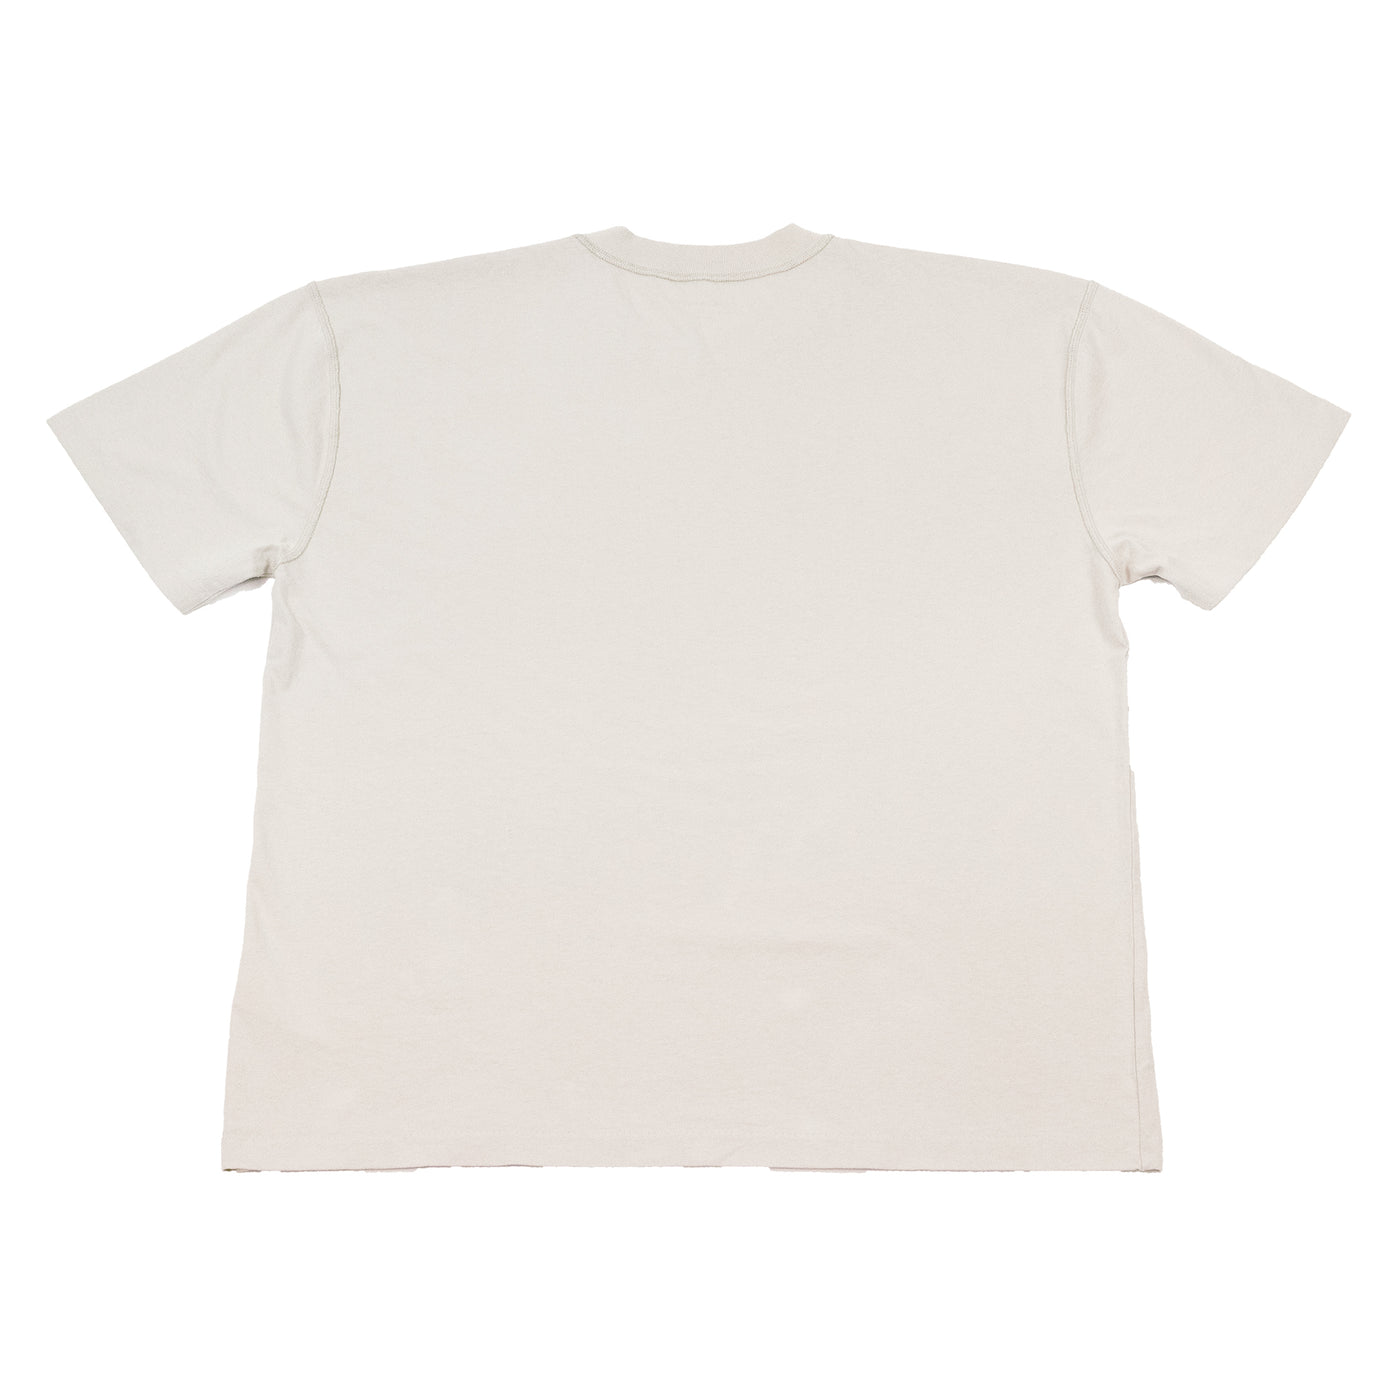 Limited Edition (Ultra) T-Shirt - Cream - Back